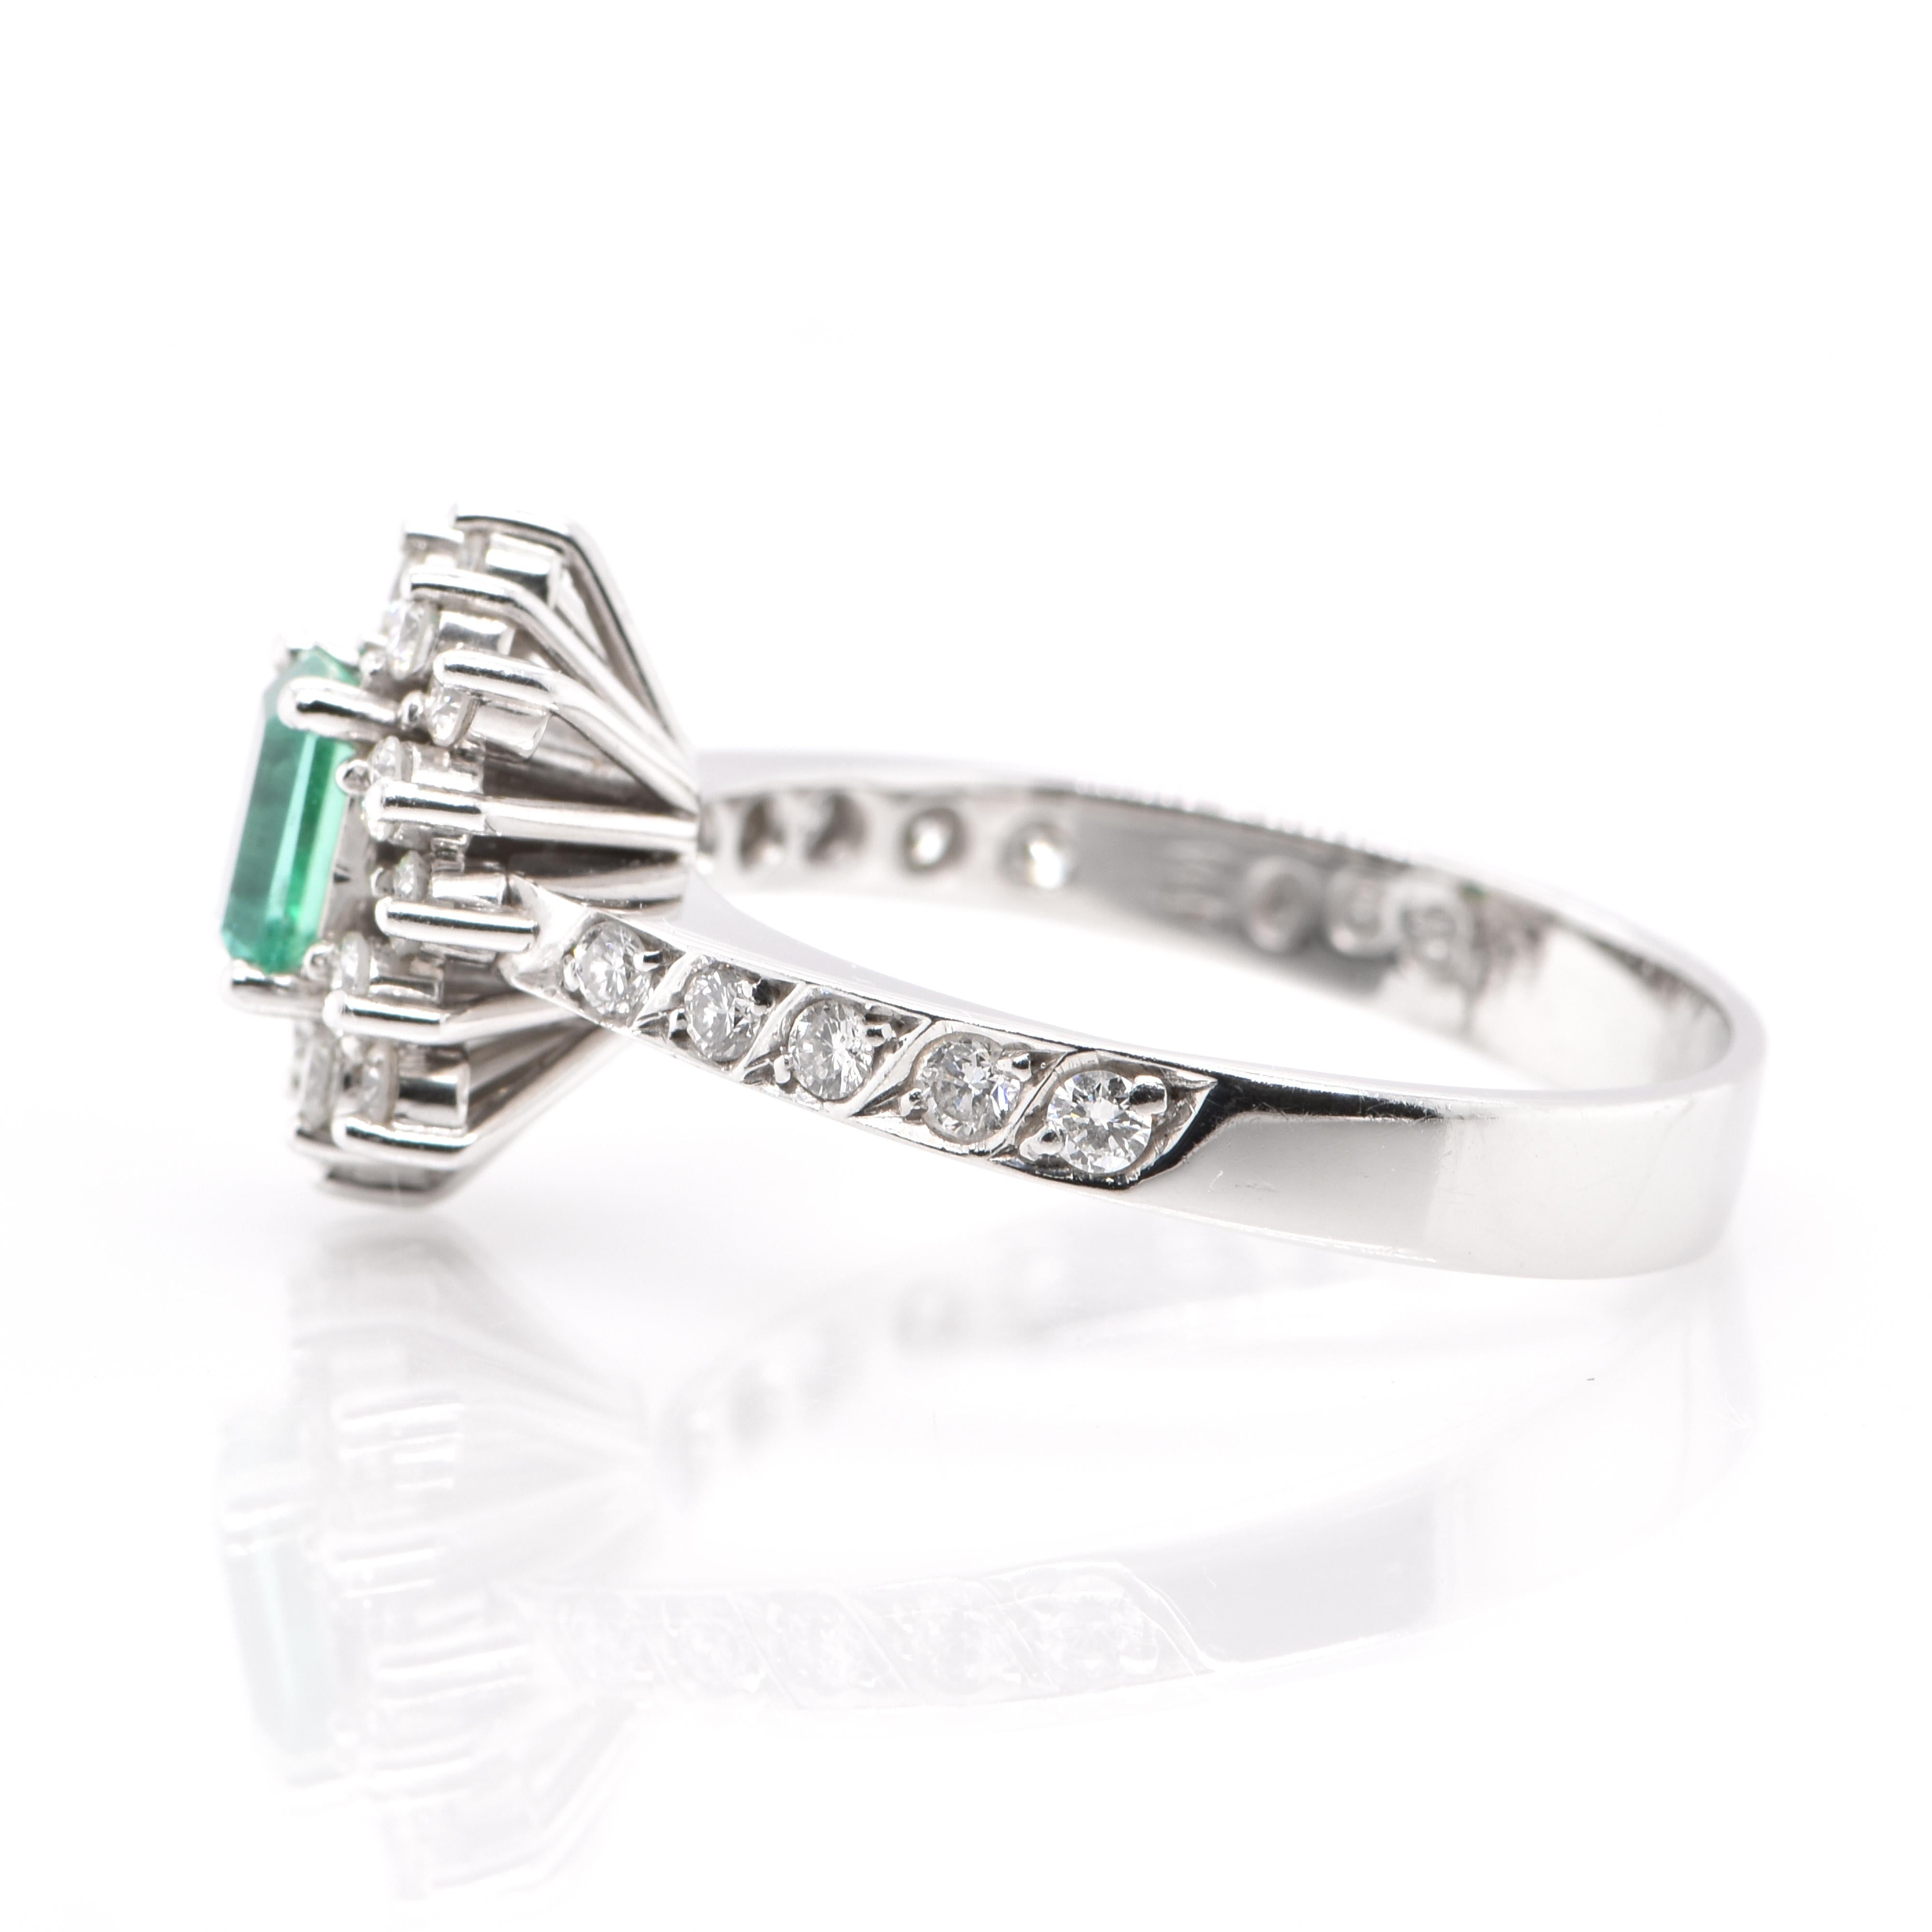 Emerald Cut 0.63 Carat Natural Emerald and Diamond Ring Set in Platinum For Sale